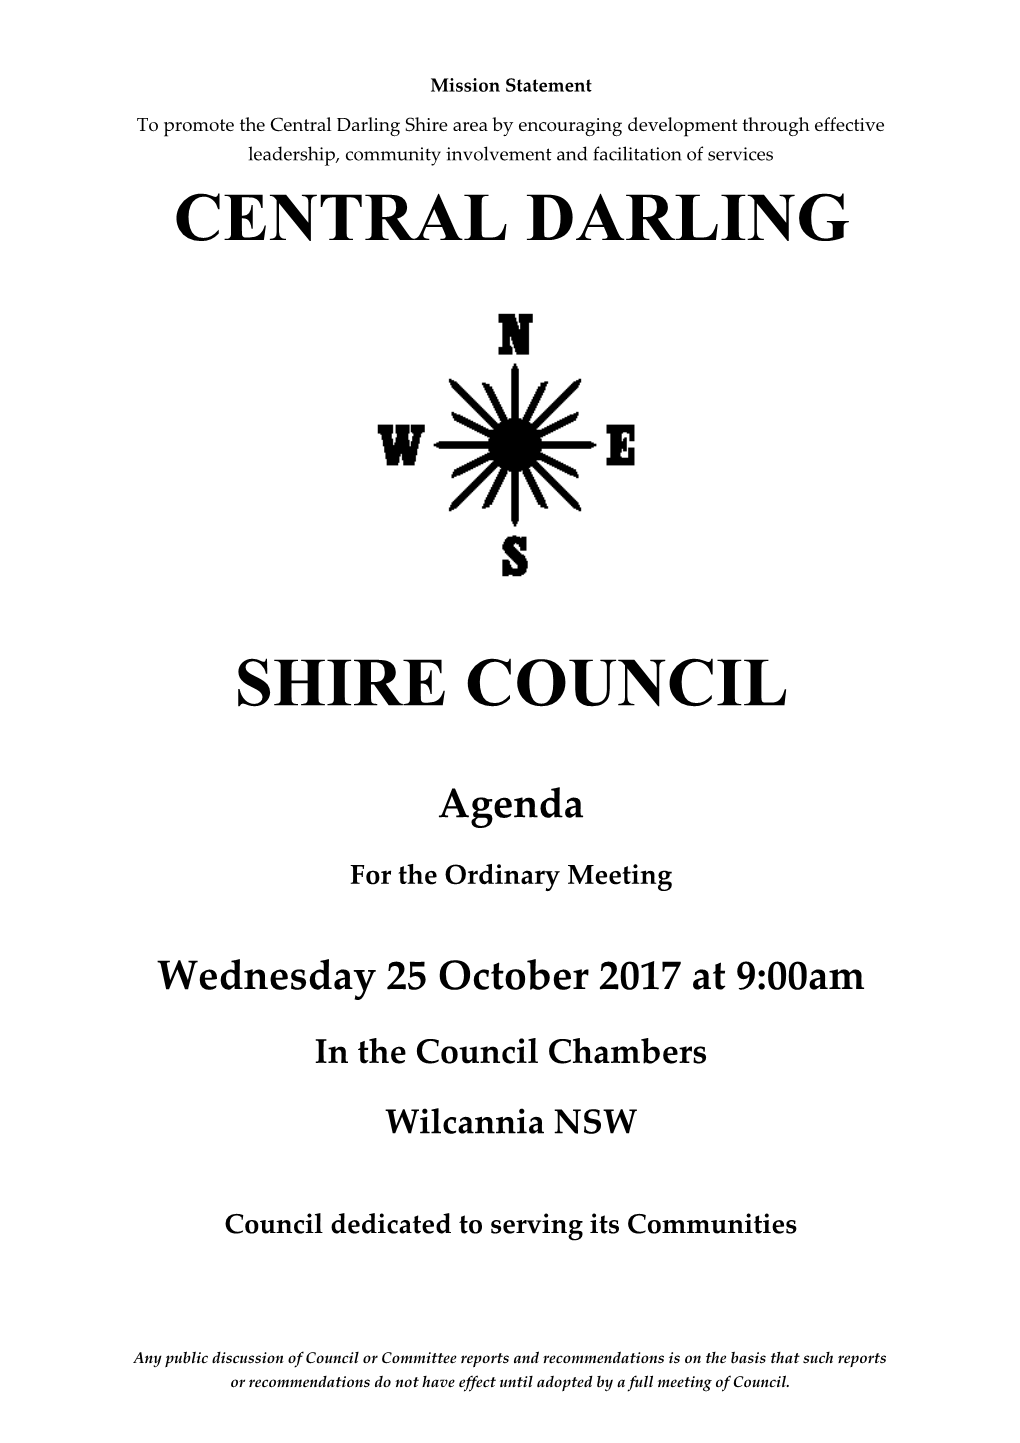 Central Darling Shire Council - Ordinary Meeting 25 October 2017